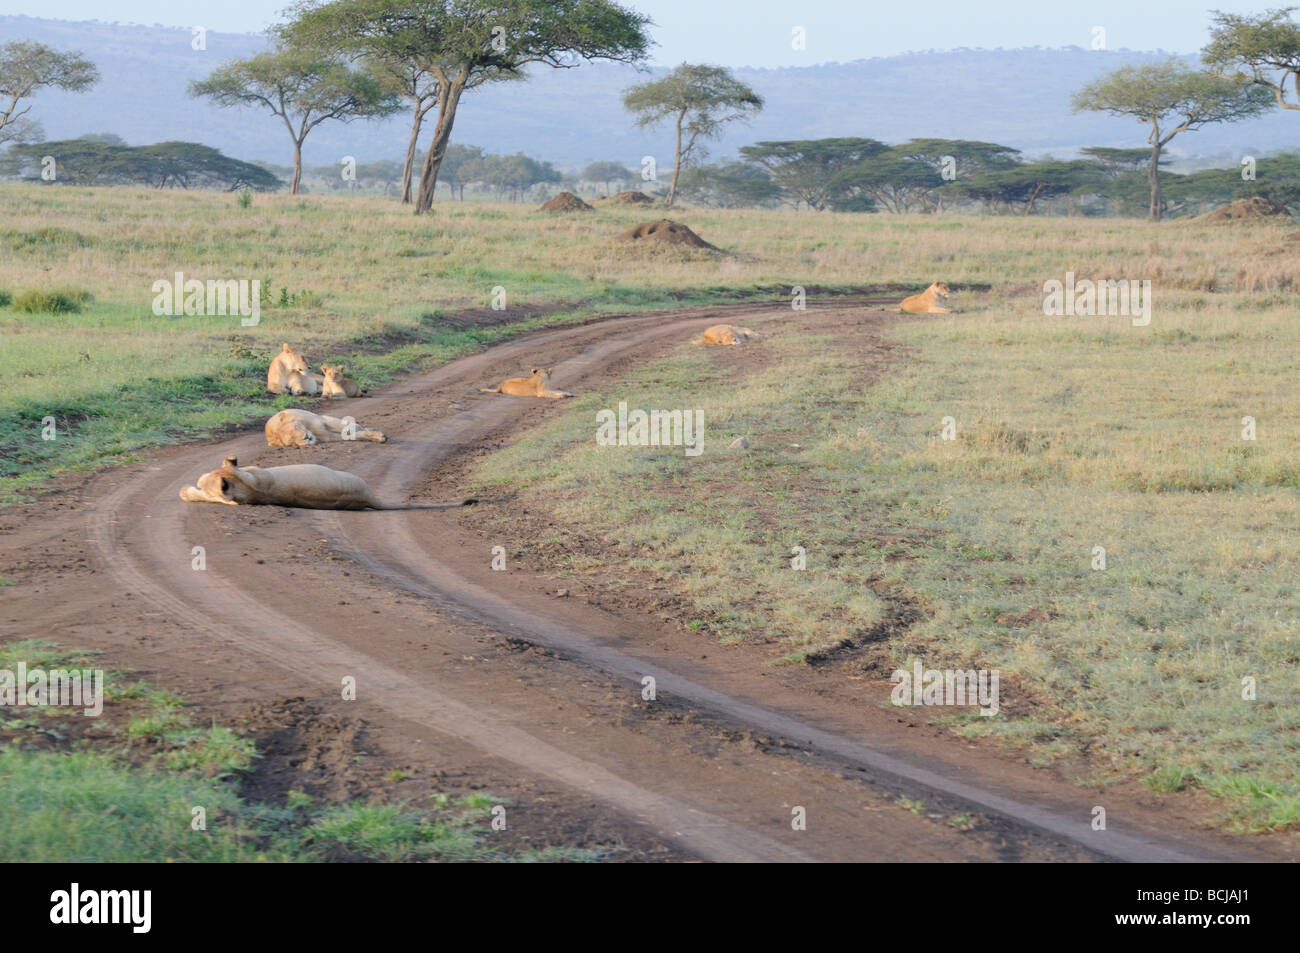 Stock photo of a pride of lions resting in the road, Serengeti National Park, Tanzania, February 2009. Stock Photo